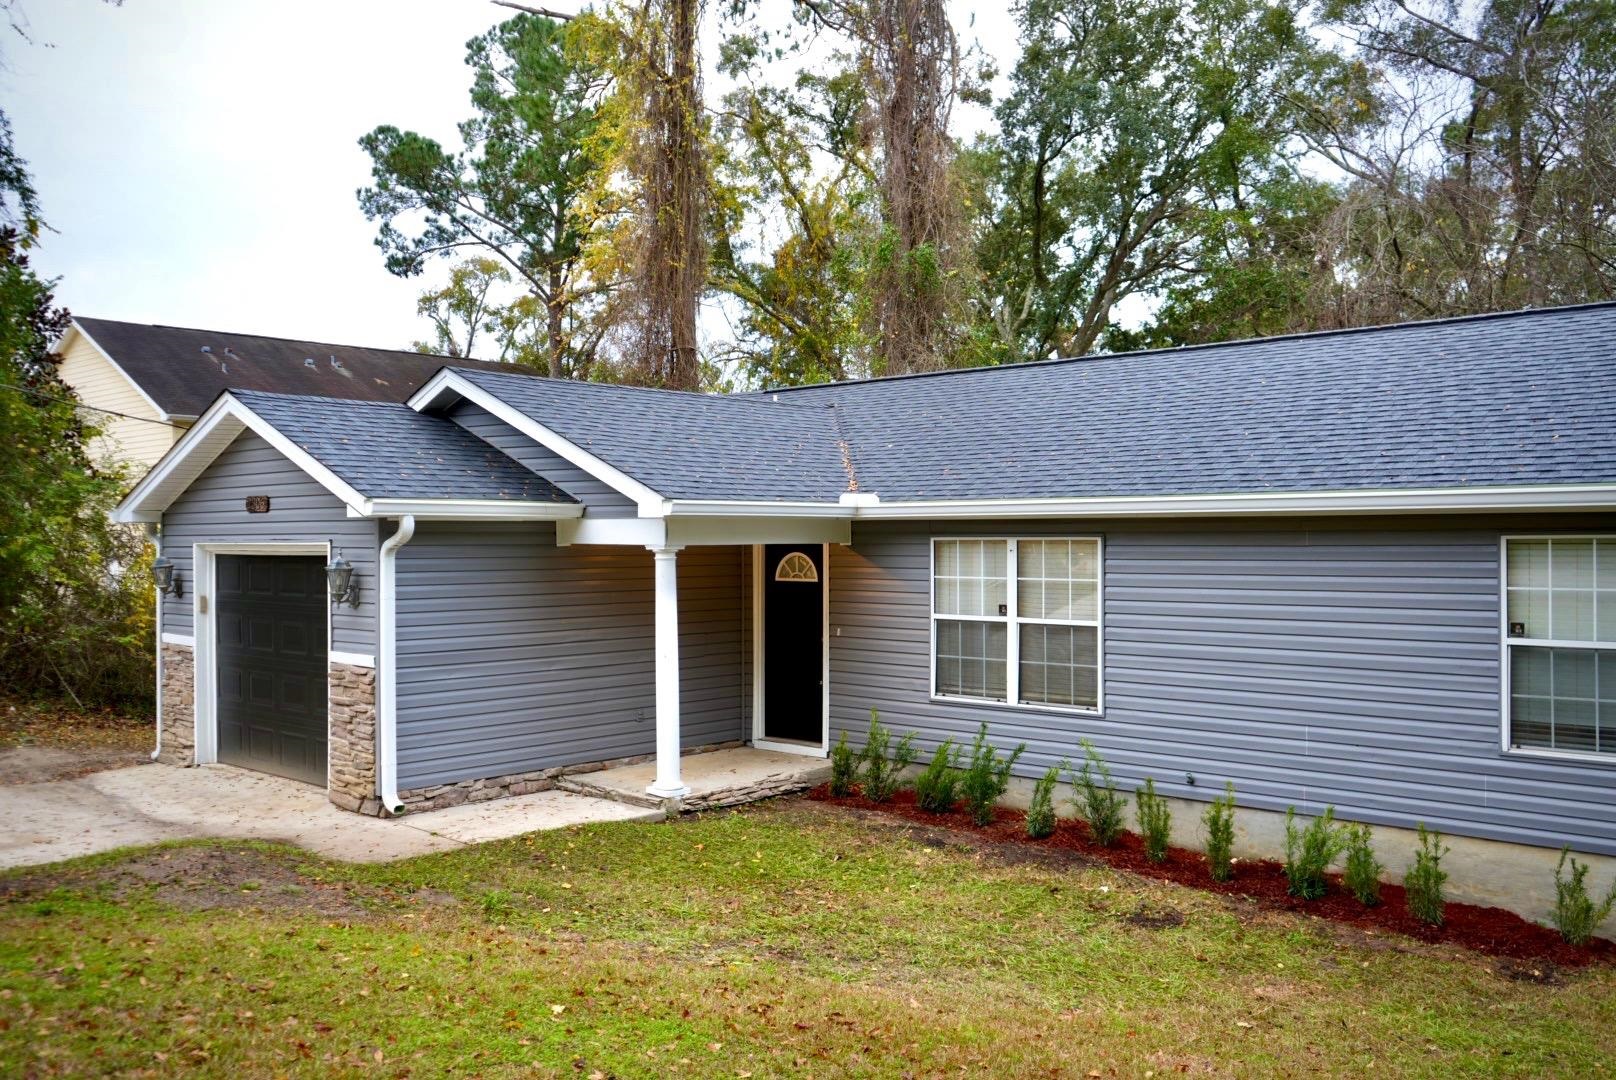 2306 Talley Lane,TALLAHASSEE,Florida 32303,3 Bedrooms Bedrooms,2 BathroomsBathrooms,Detached single family,2306 Talley Lane,366796